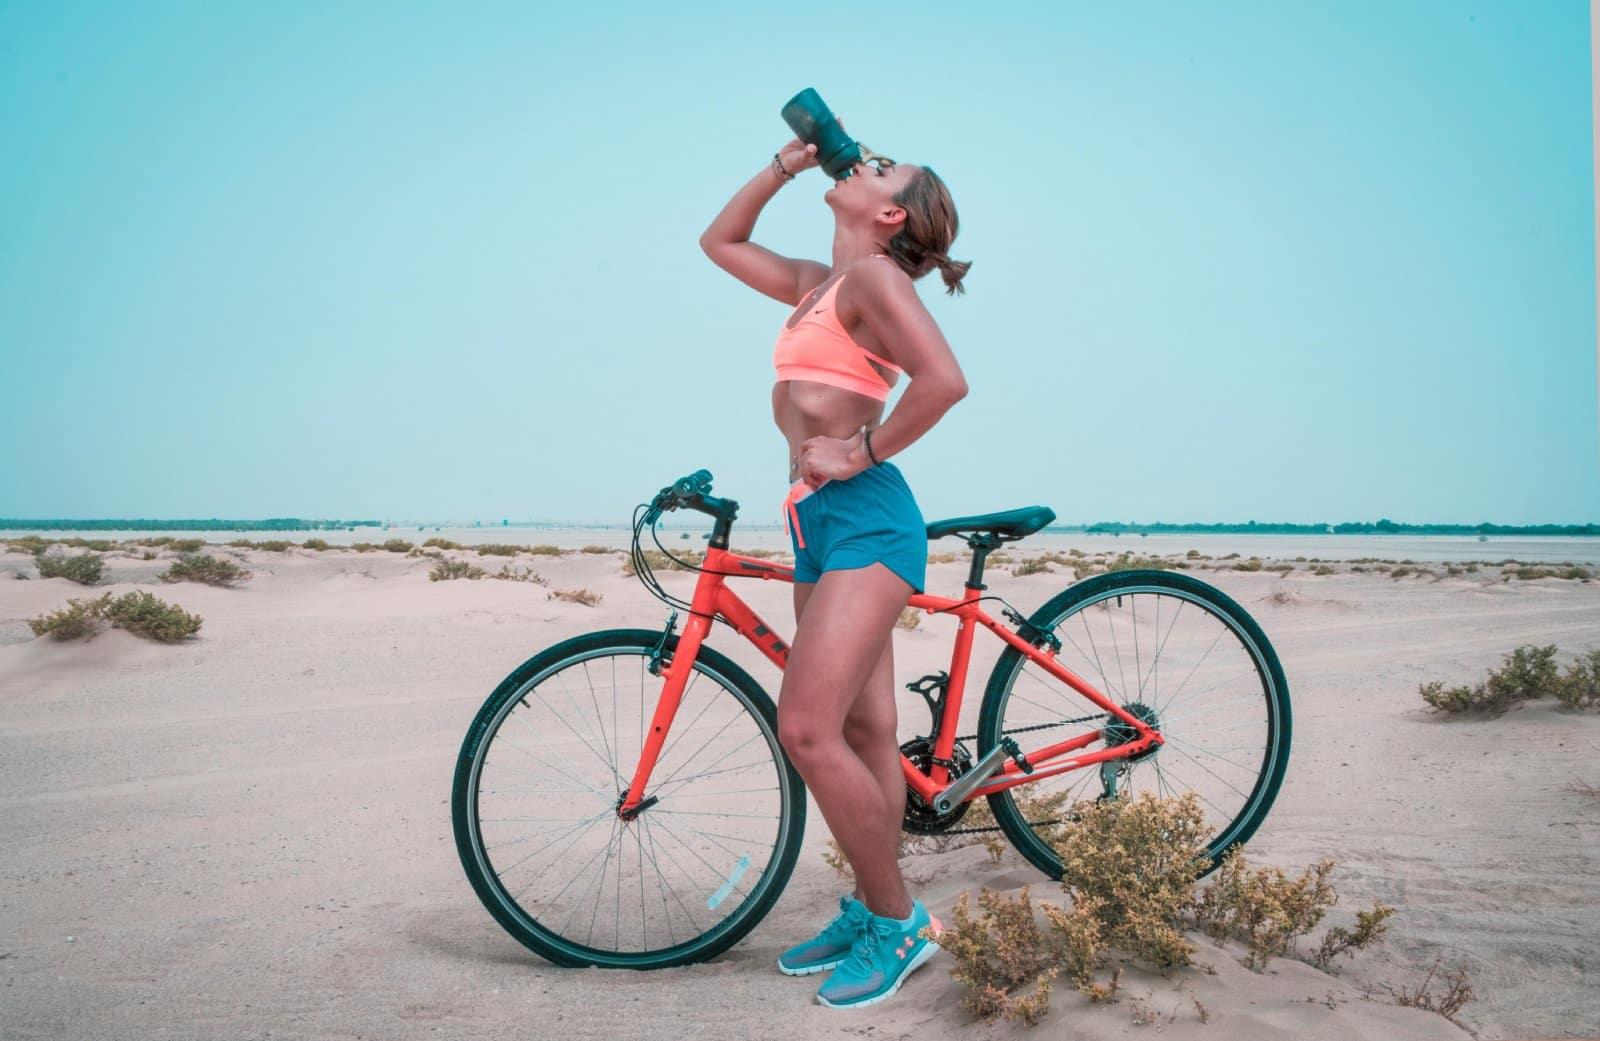 <p class="wp-caption-text">Image Credit: Pexels / The Lazy Artist Gallery</p>  <p><span>Proper nutrition and hydration are an essential part of any successful cycling tour. On the road, your body will require a steady supply of energy and fluids to perform optimally. Start by focusing on a balanced diet rich in carbohydrates, proteins, and fats, and begin hydrating well before you feel thirsty, especially in hot or humid conditions.</span></p> <p><span>During your rides, consume small, frequent meals and snacks to maintain energy levels, and carry electrolyte replacements to replenish salts lost through sweat. It’s also vital to understand how your body reacts to different foods and hydration products during physical exertion, so experiment to find what works best for you during your training.</span></p> <p><span>This proactive approach to nutrition and hydration will help you maintain energy levels, prevent cramps and dehydration, and ensure you can enjoy every mile of your adventure.</span></p> <p><b>Insider’s Tip: </b><span>Experiment with various energy bars, gels, and drinks during training to find what works best for your stomach and taste preferences.</span></p>